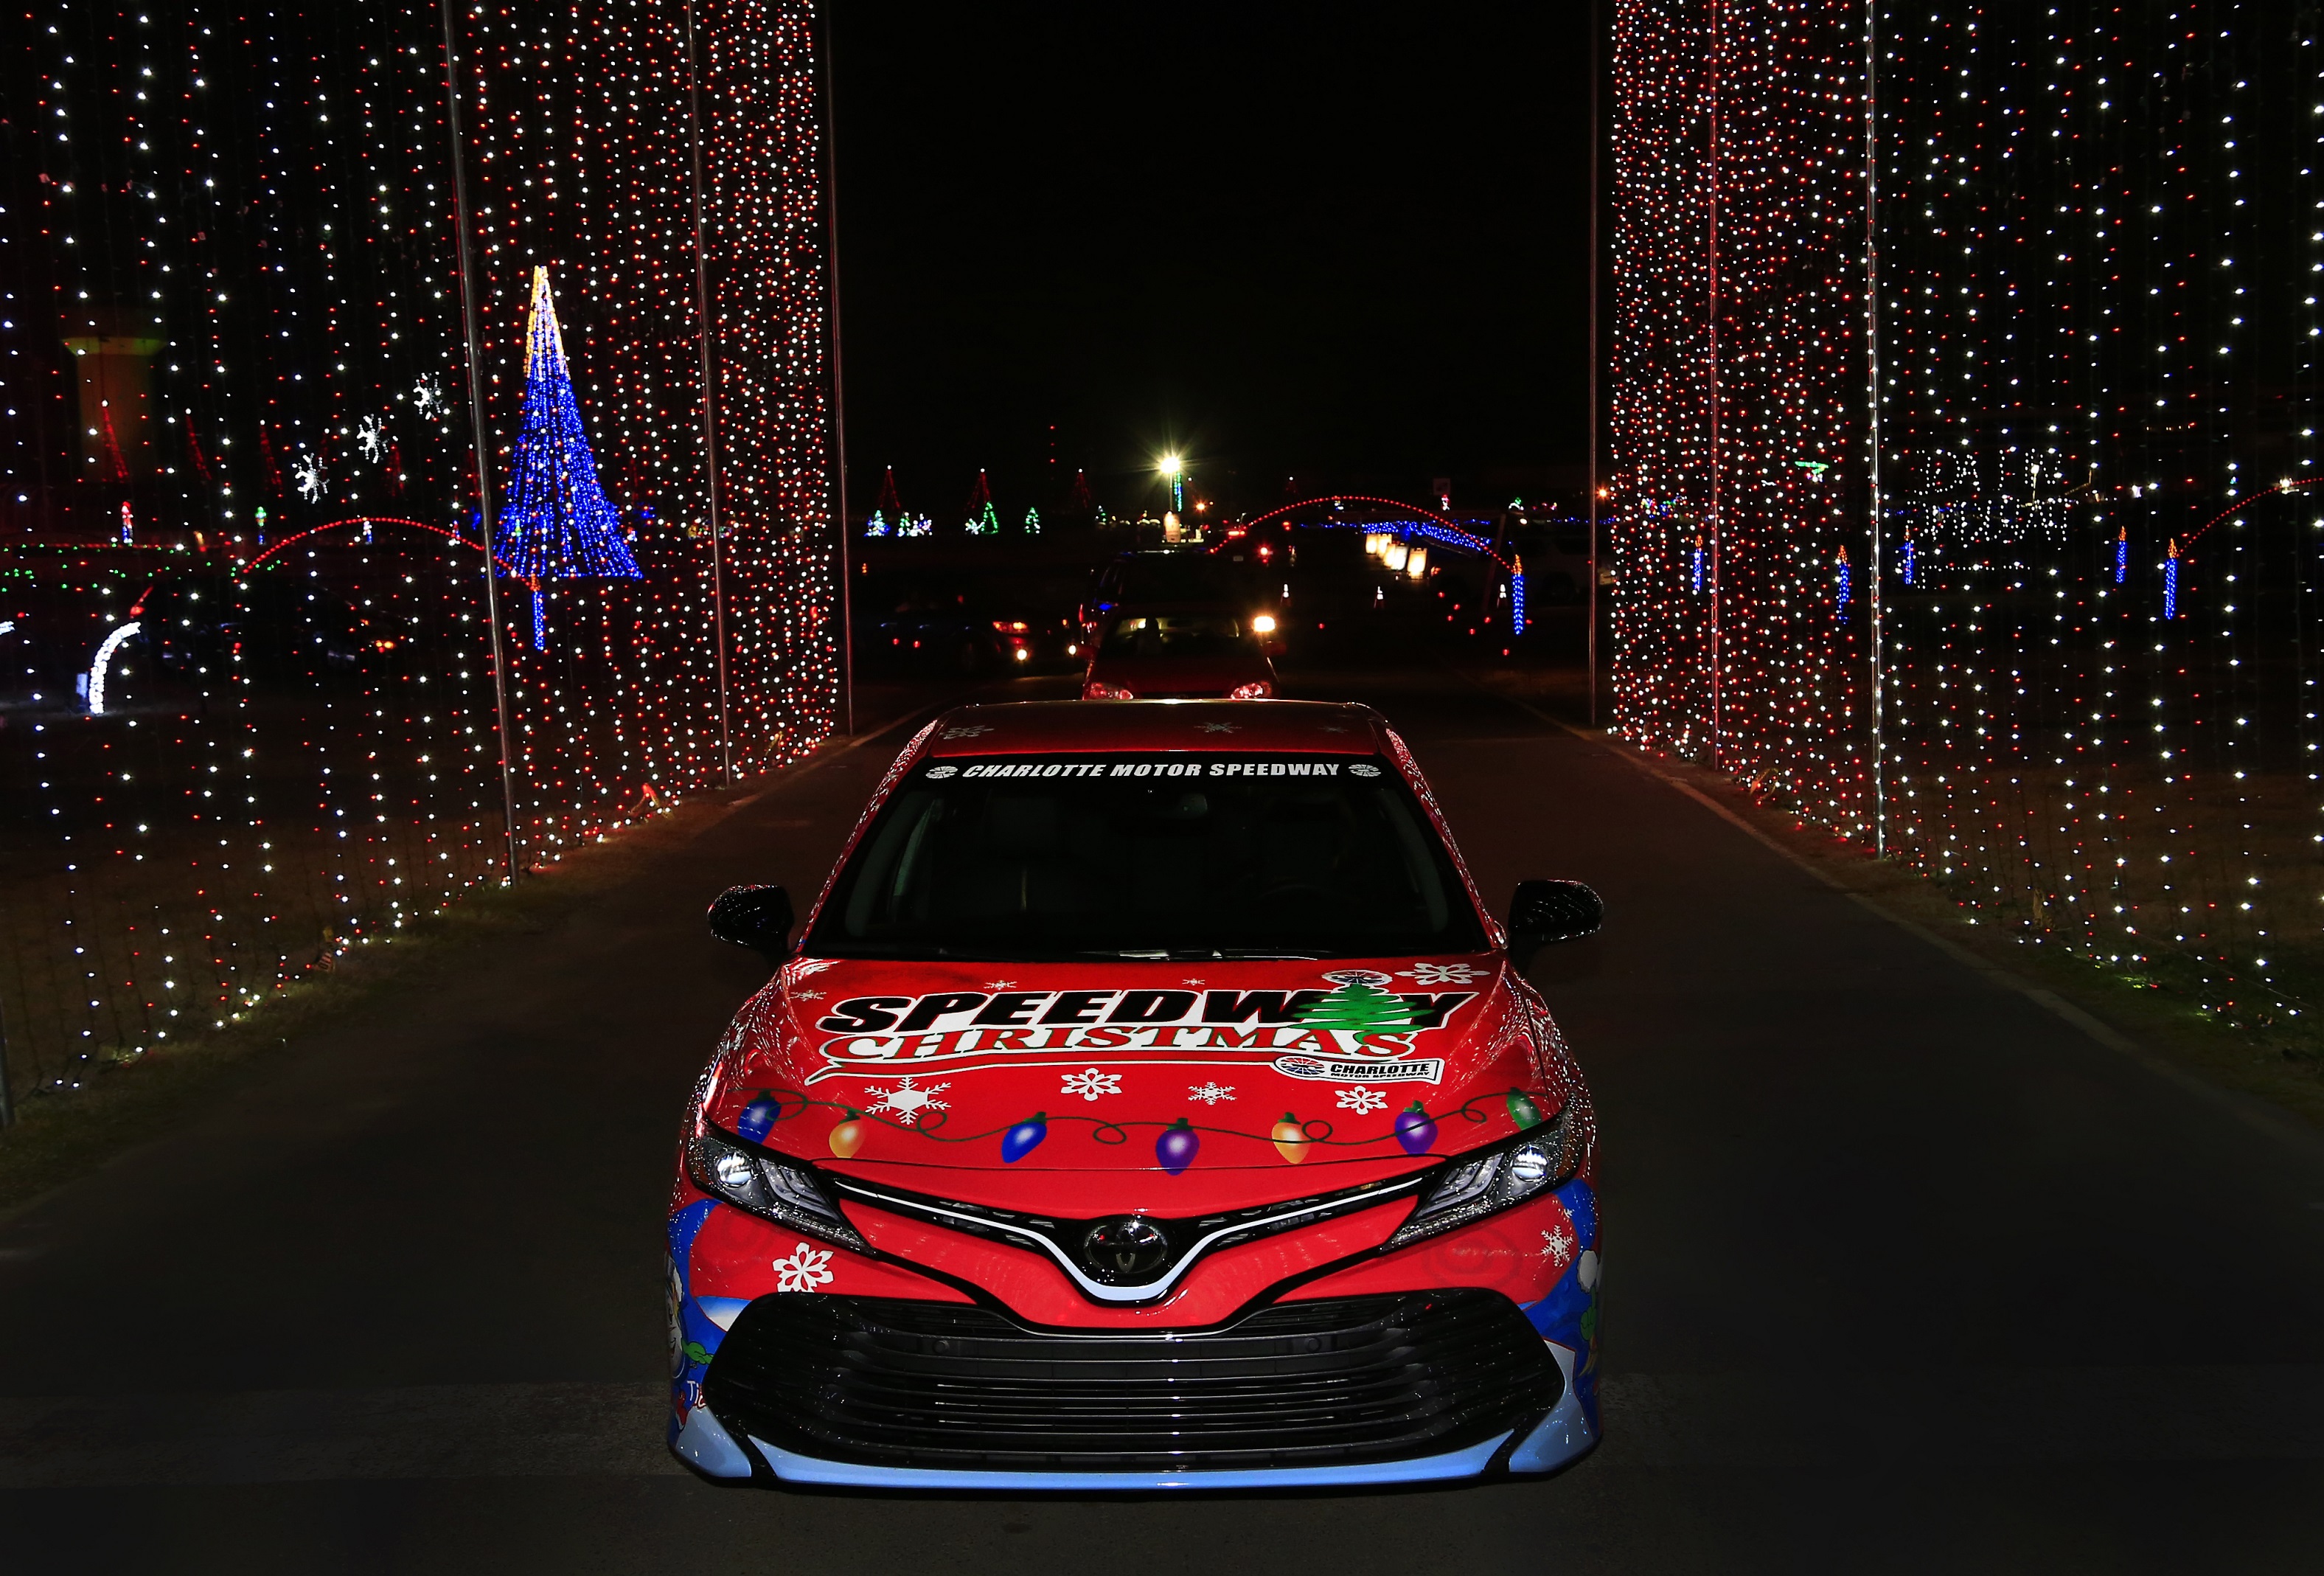 Charlotte Motor Speedway's Speedway Christmas presented by Disconnect & Drive returns for its ninth edition starting on Nov. 18 and running through Dec. 31.